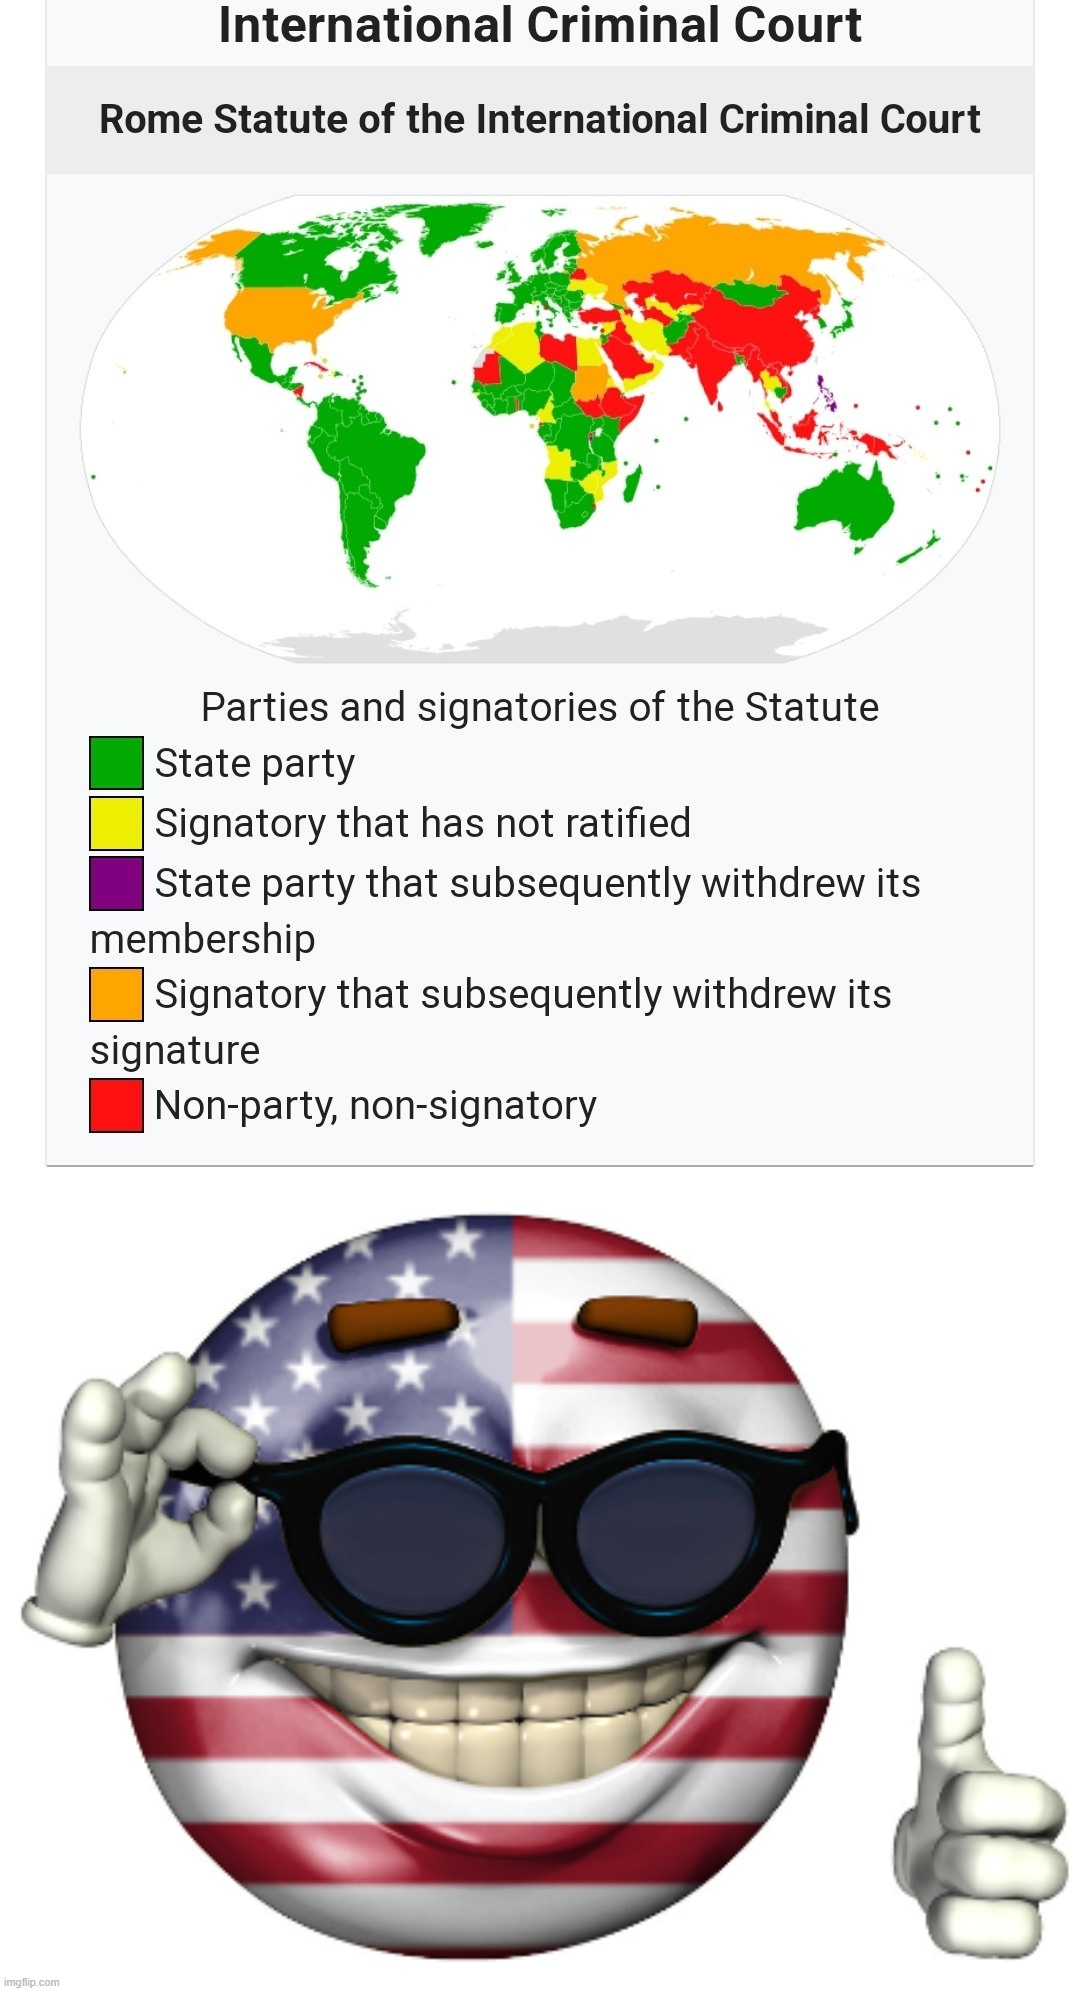 Ah yes: when America falls into the same category as *checks notes* Russia + North(?) Sudan. #common #america #l | image tagged in icc signatories,american picardia,icc,murica,'murica,international law | made w/ Imgflip meme maker